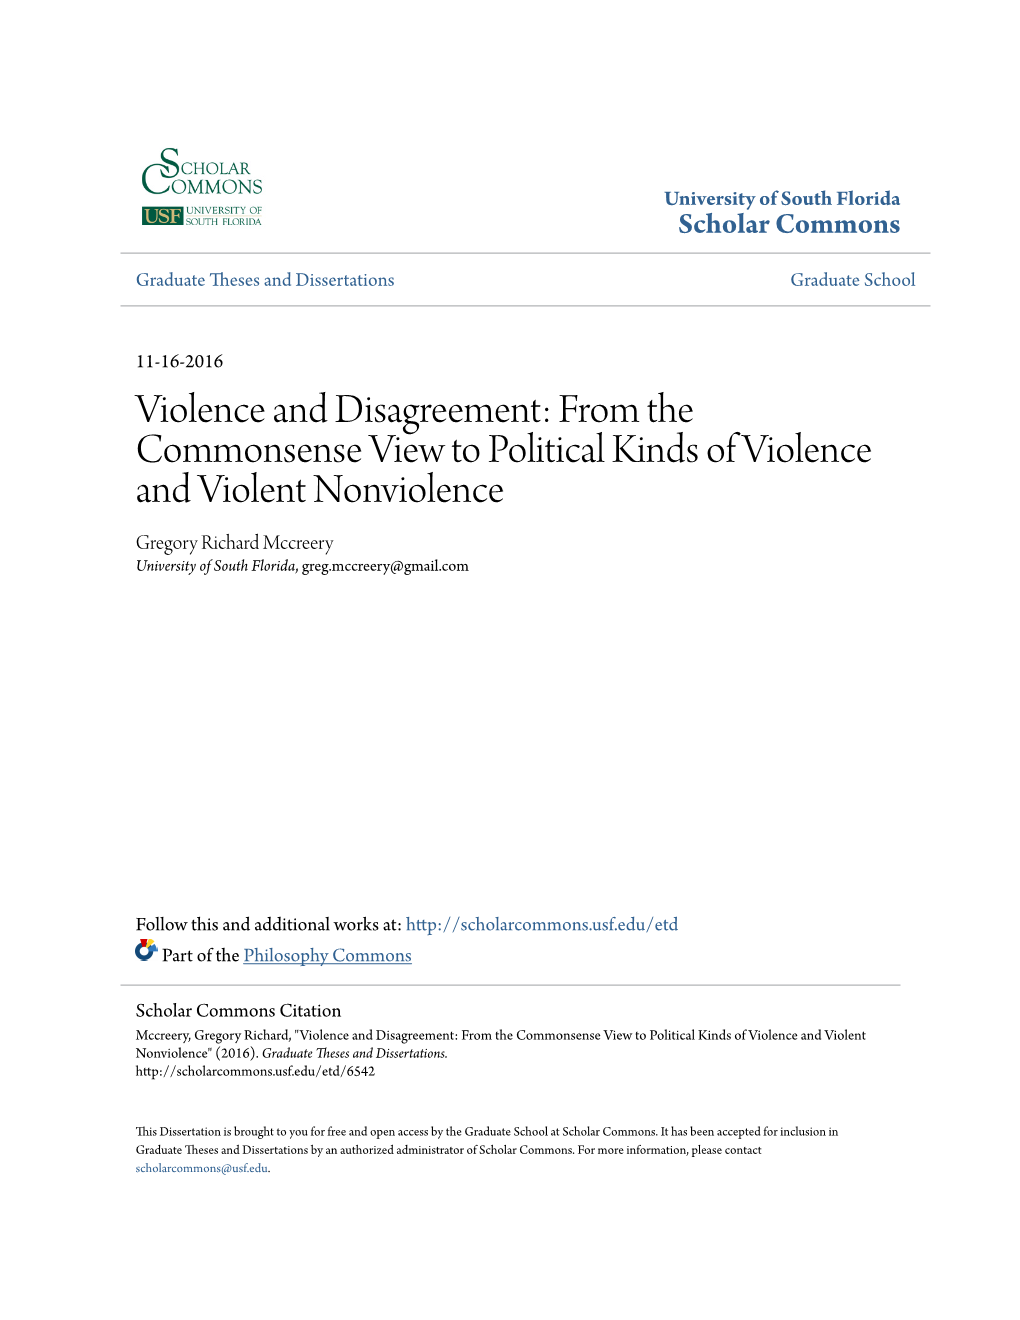 Violence and Disagreement: from the Commonsense View to Political